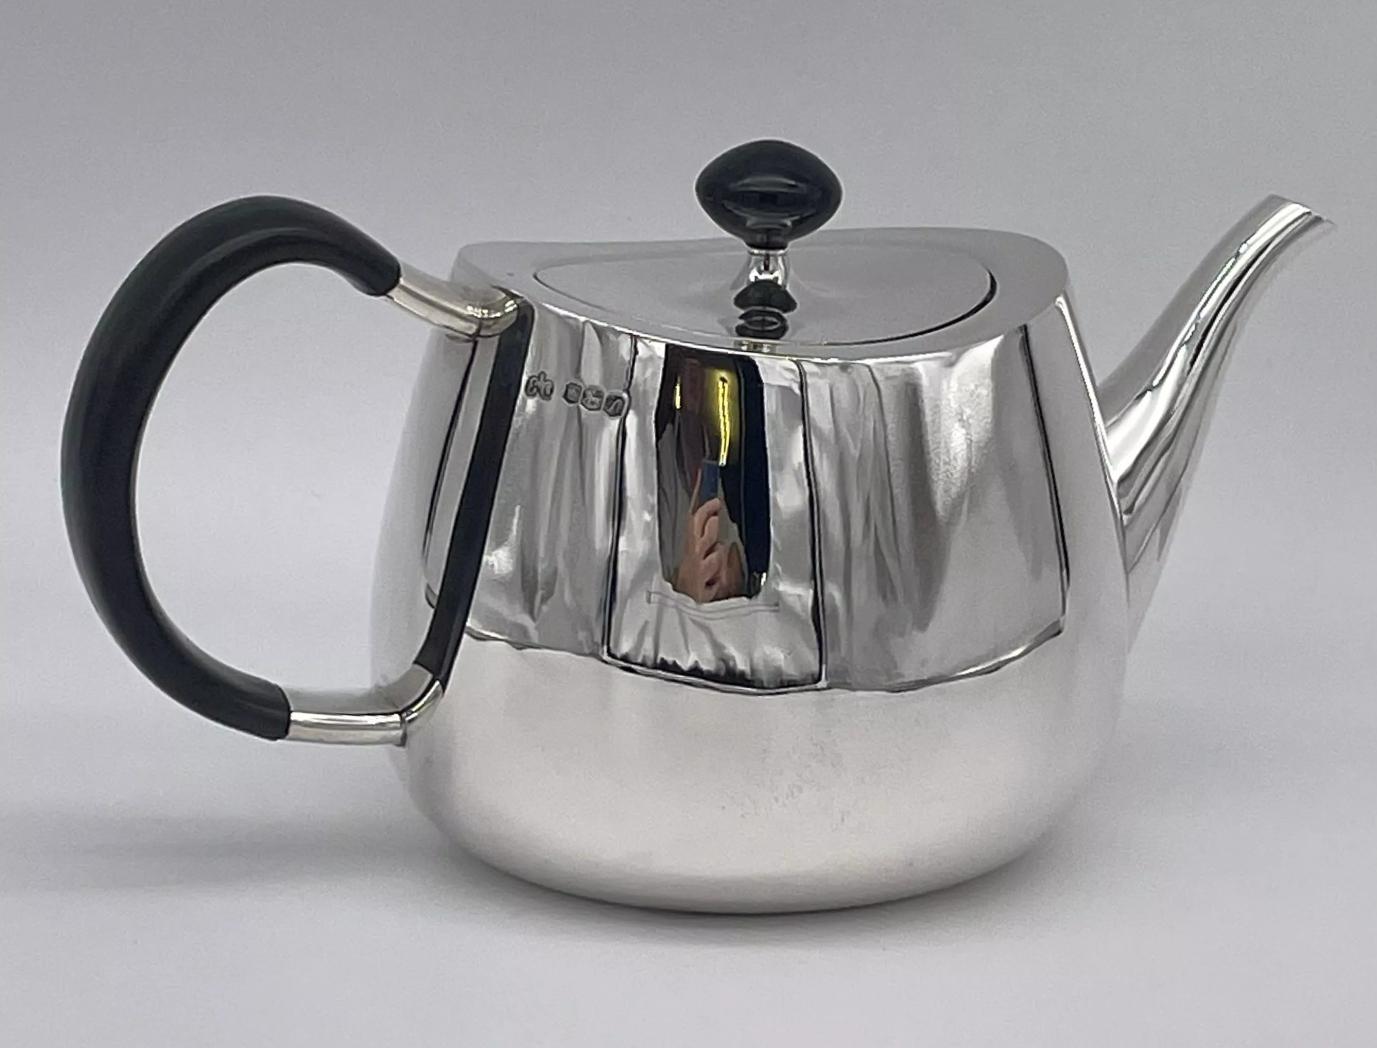 An Elizabeth II modernist sterling silver four-piece tea and coffee service, Sheffield 1962/68/69 mark of Elkington, designed by David Mellor.

Pride pattern, of plain ogee form, comprising a teapot, coffee pot, milk jug and twin handled sugar bowl.